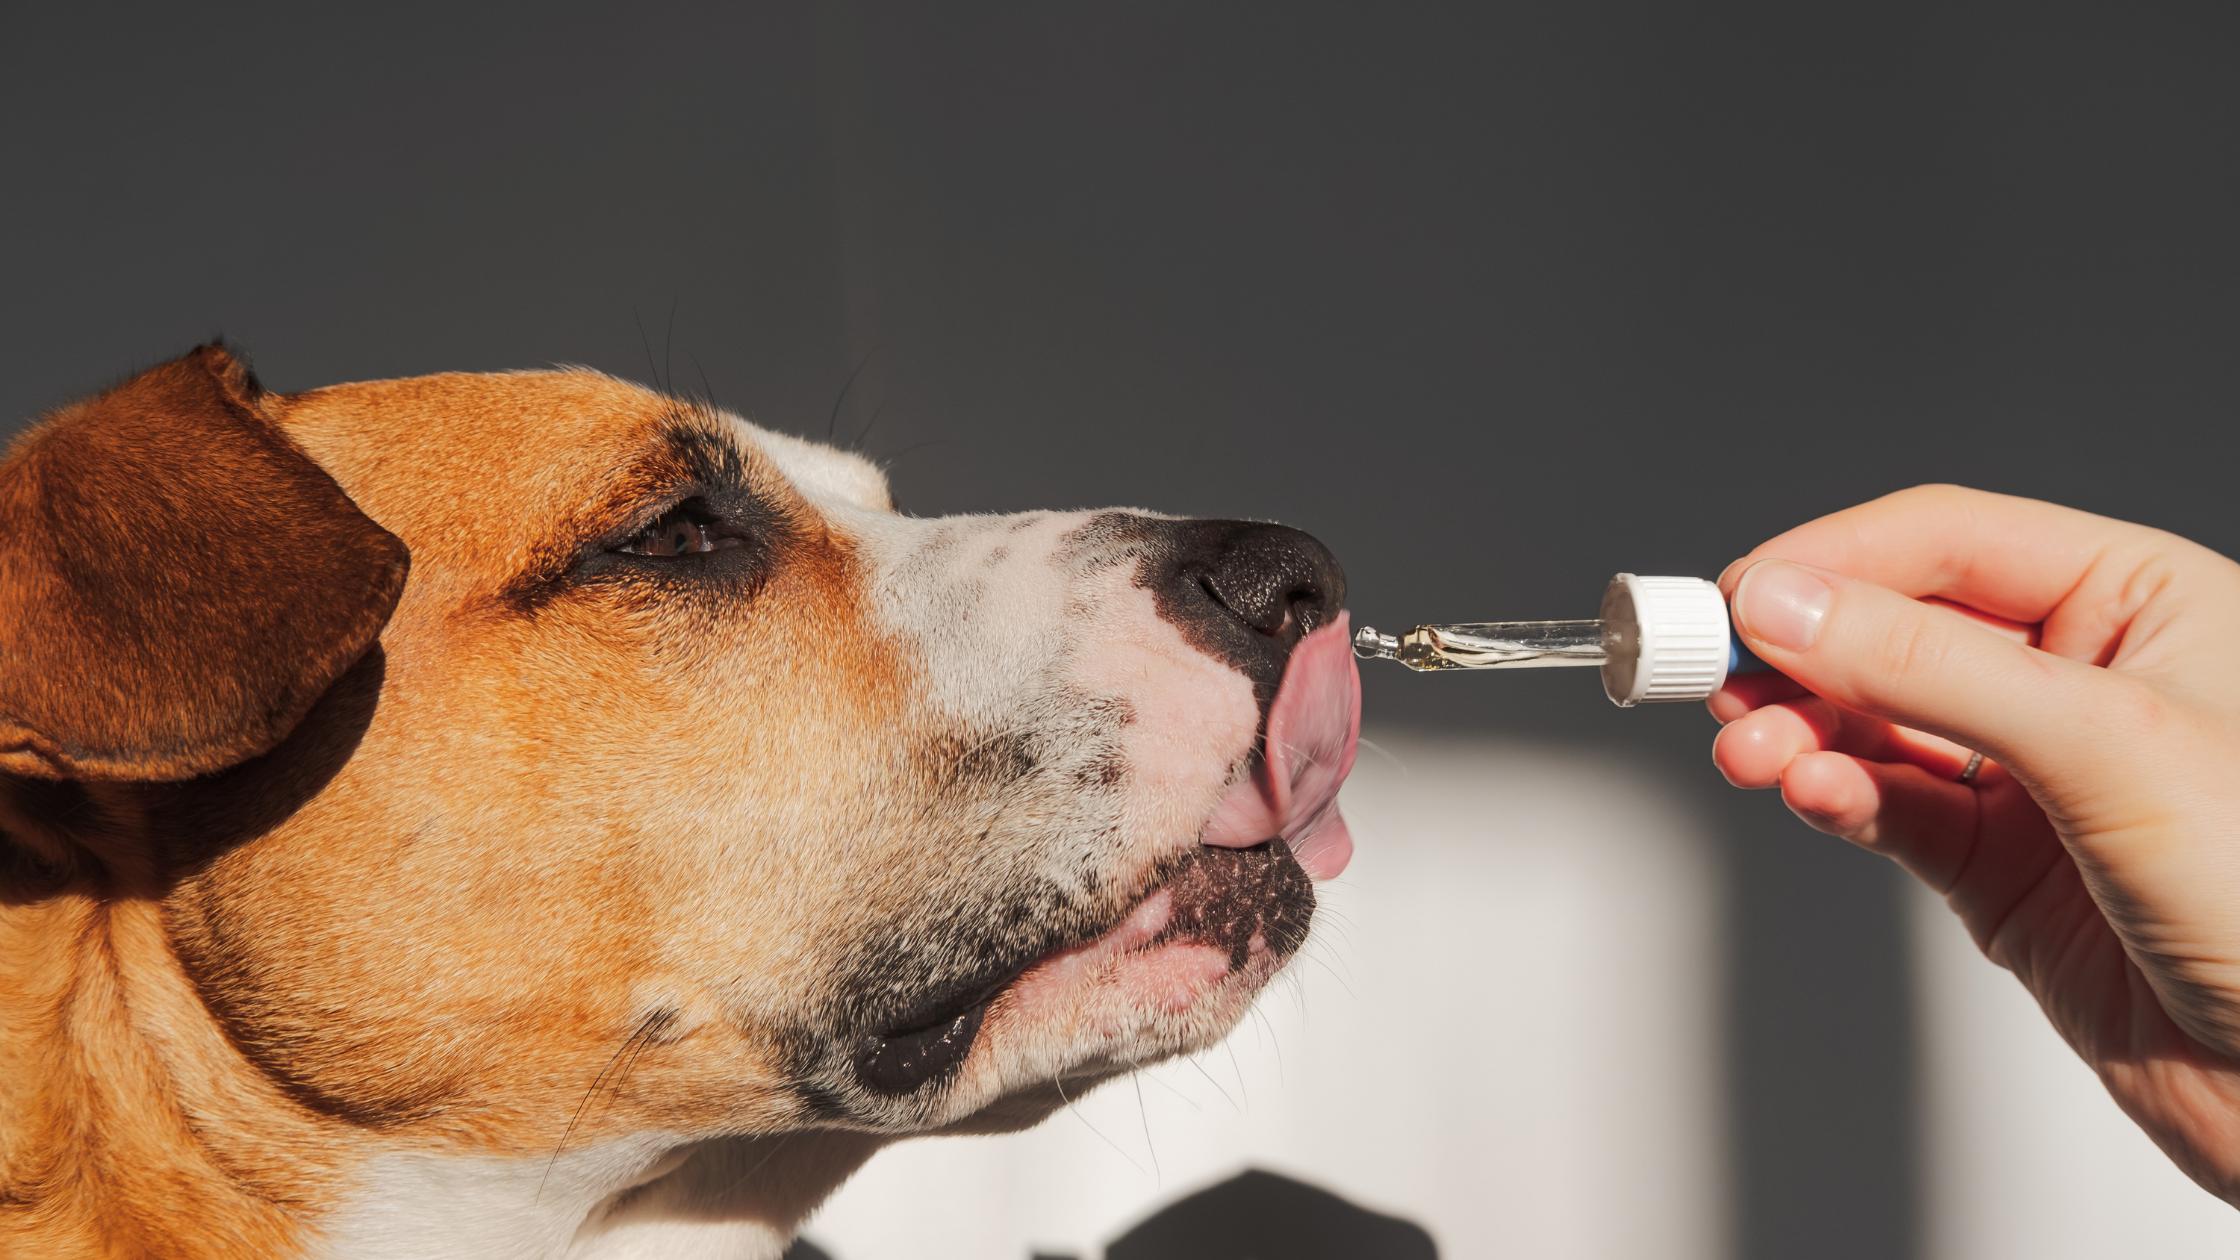 A close-up of a dog being given medicine by its owner.